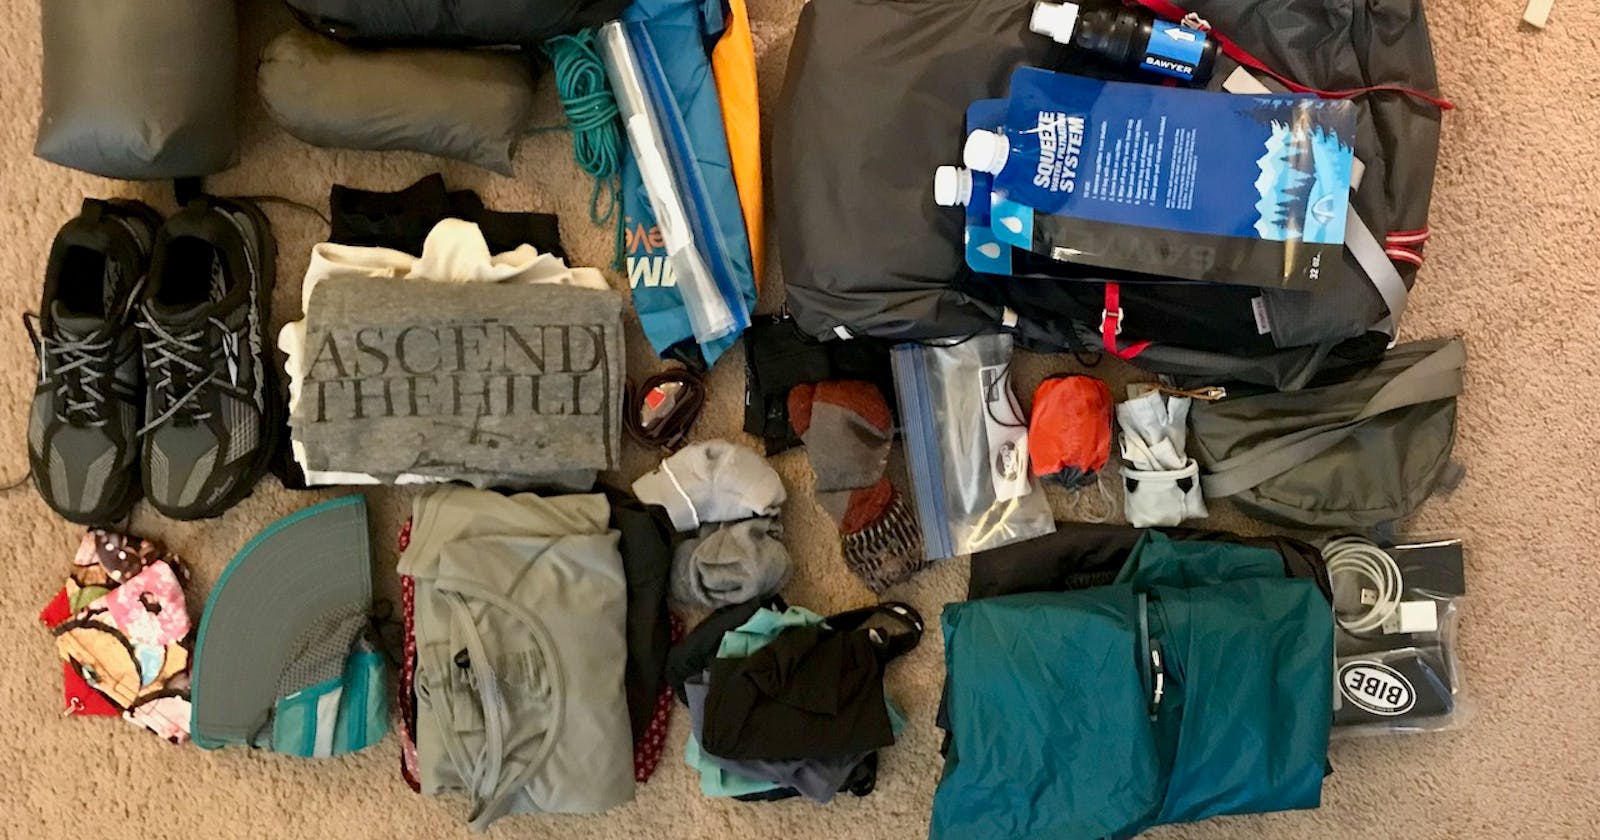 Packing for the Journey Ahead